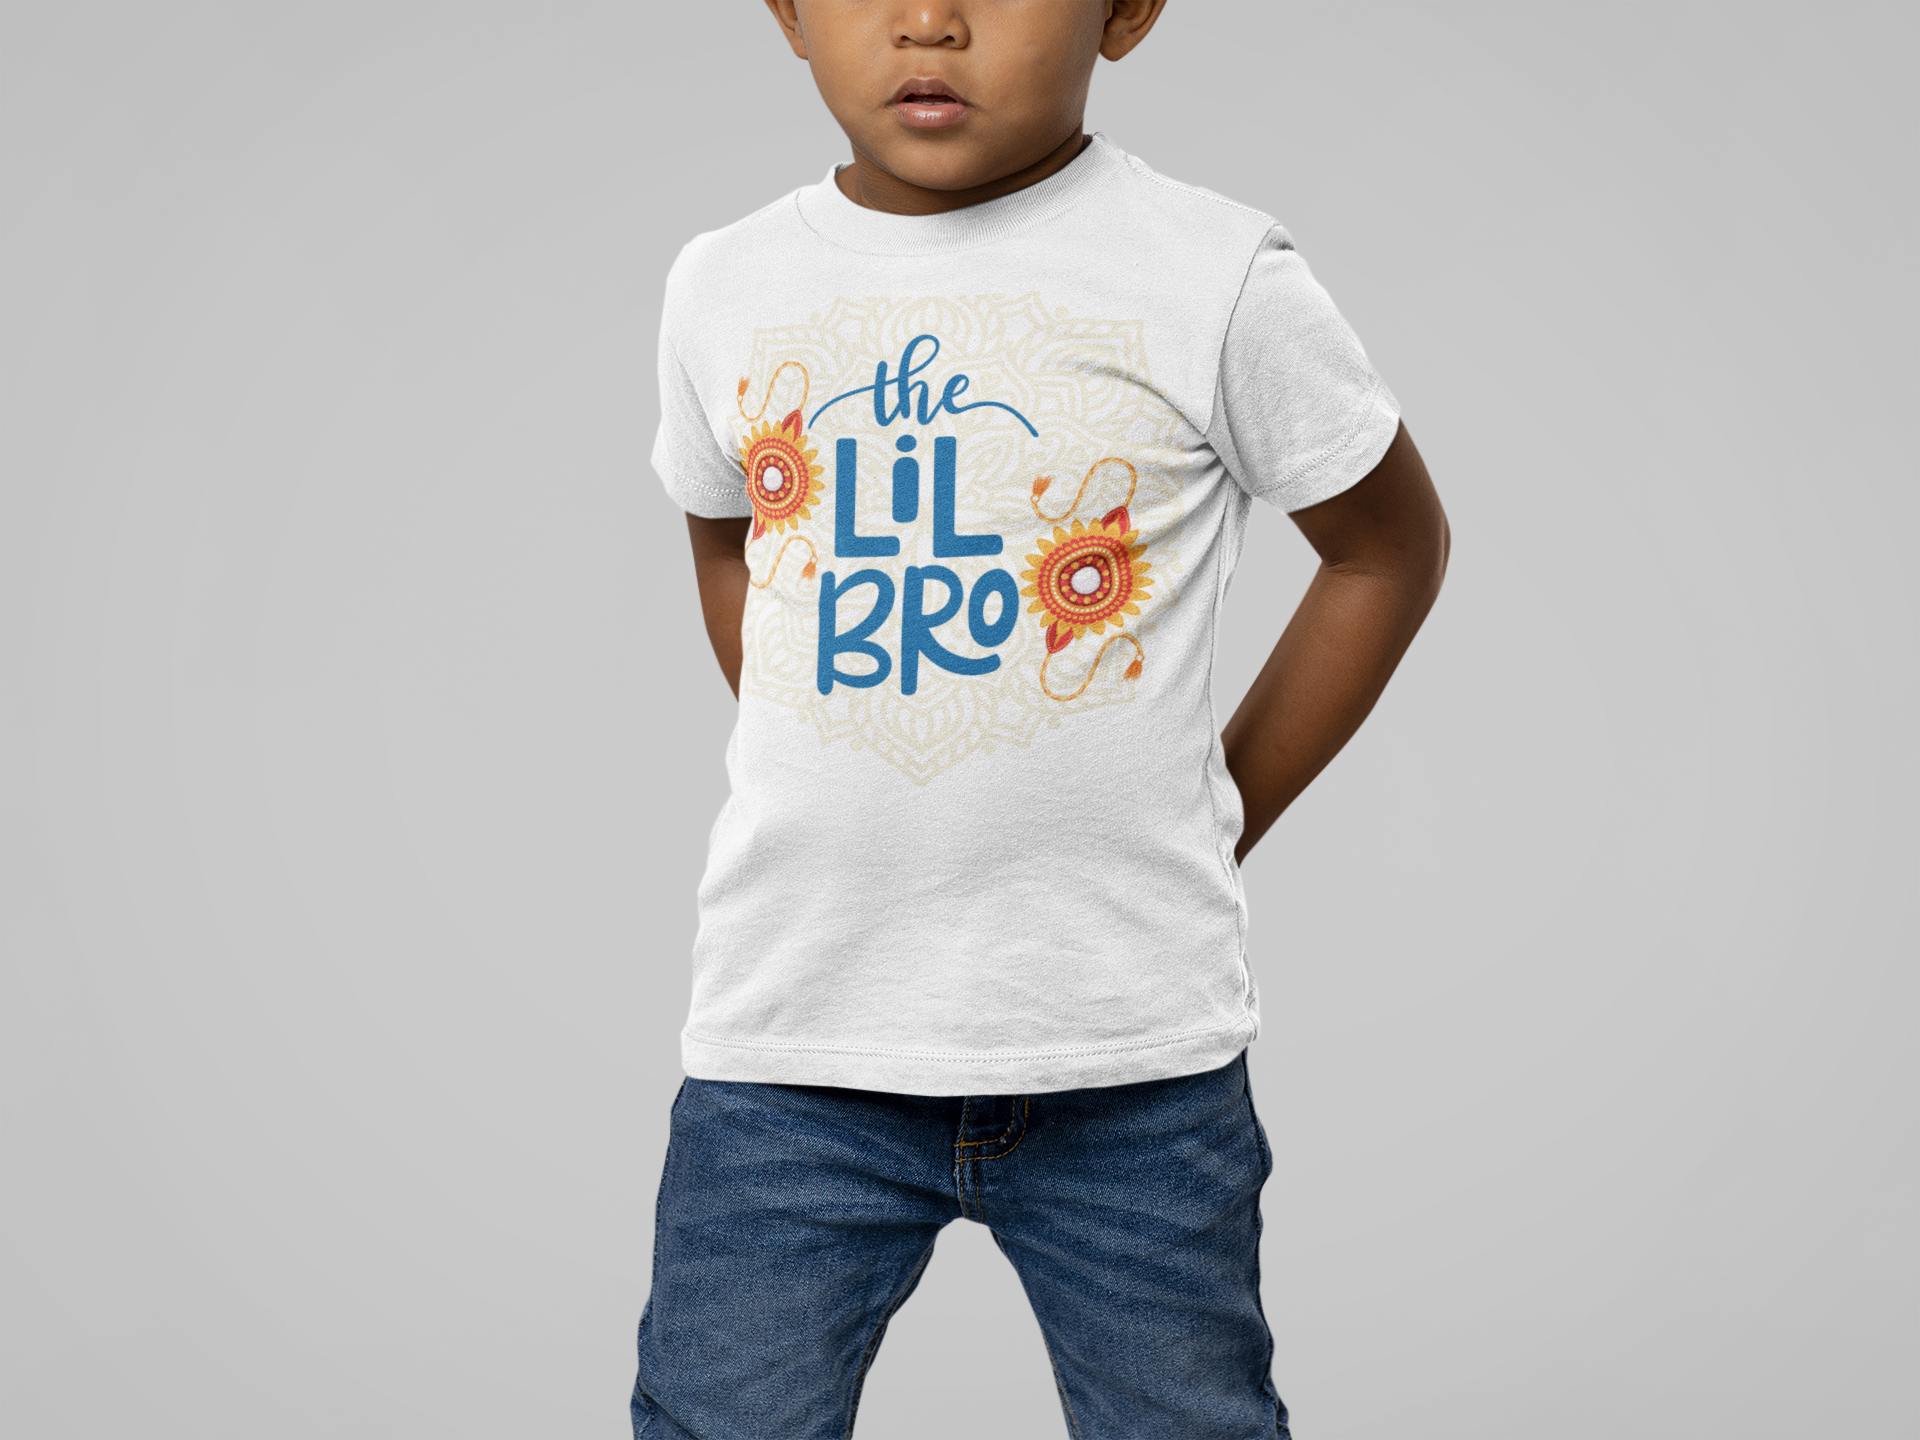 The BROTHER - SISTER Printed Tshirt for Kids